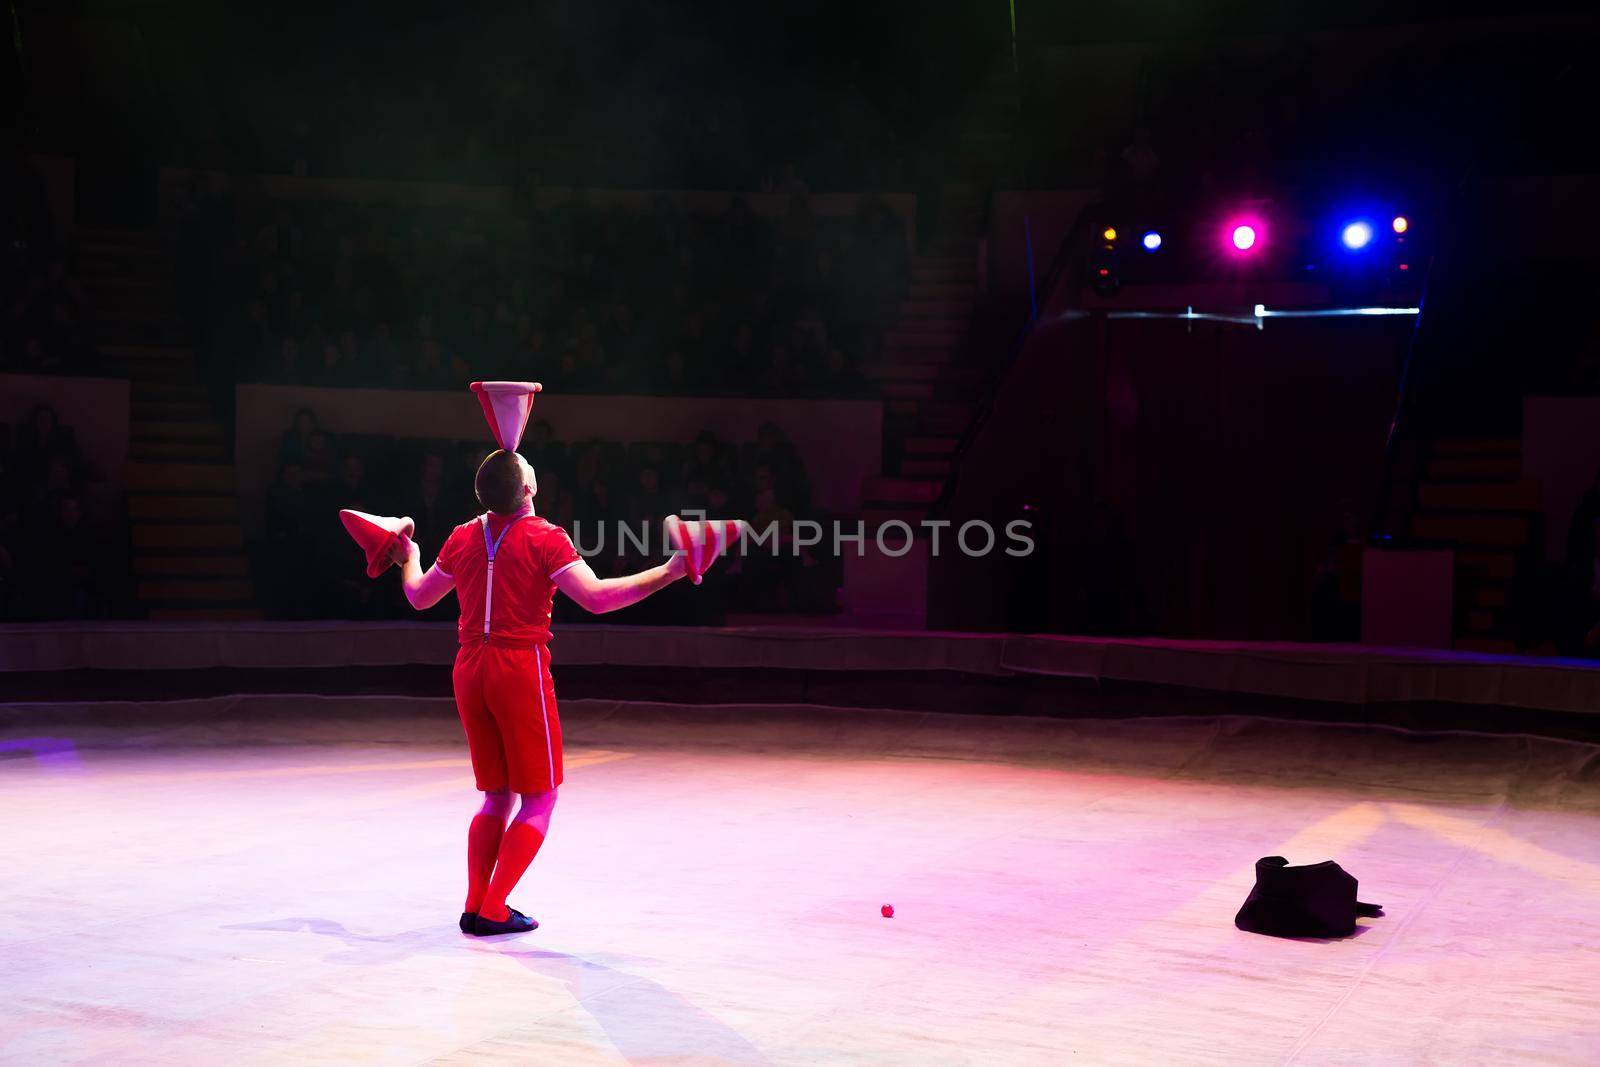 Acrobat performs a difficult trick in the circus by StudioPeace